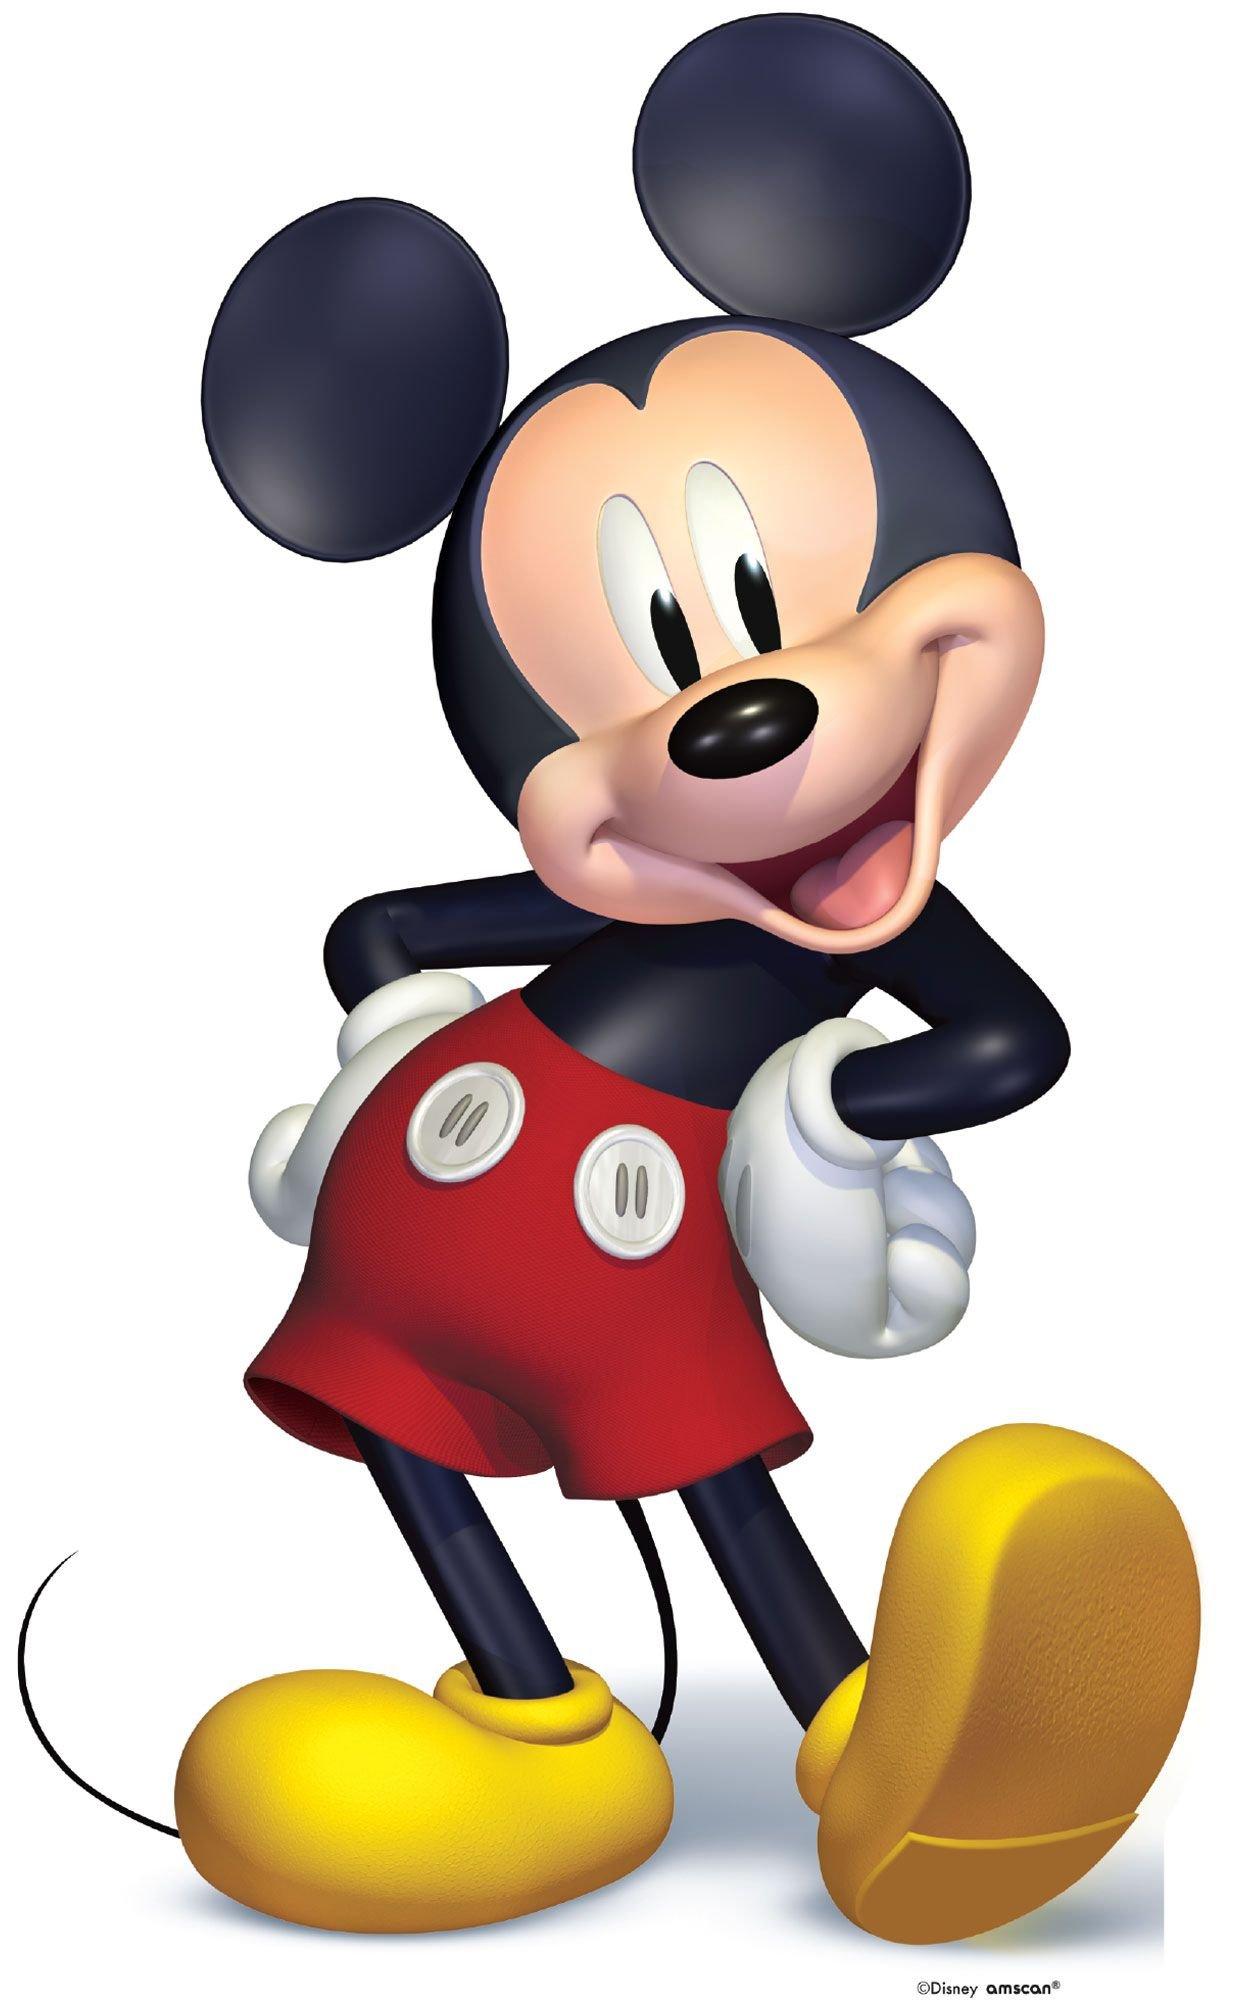 Mickey on the Go Cardboard Cutout, 3ft | Party City